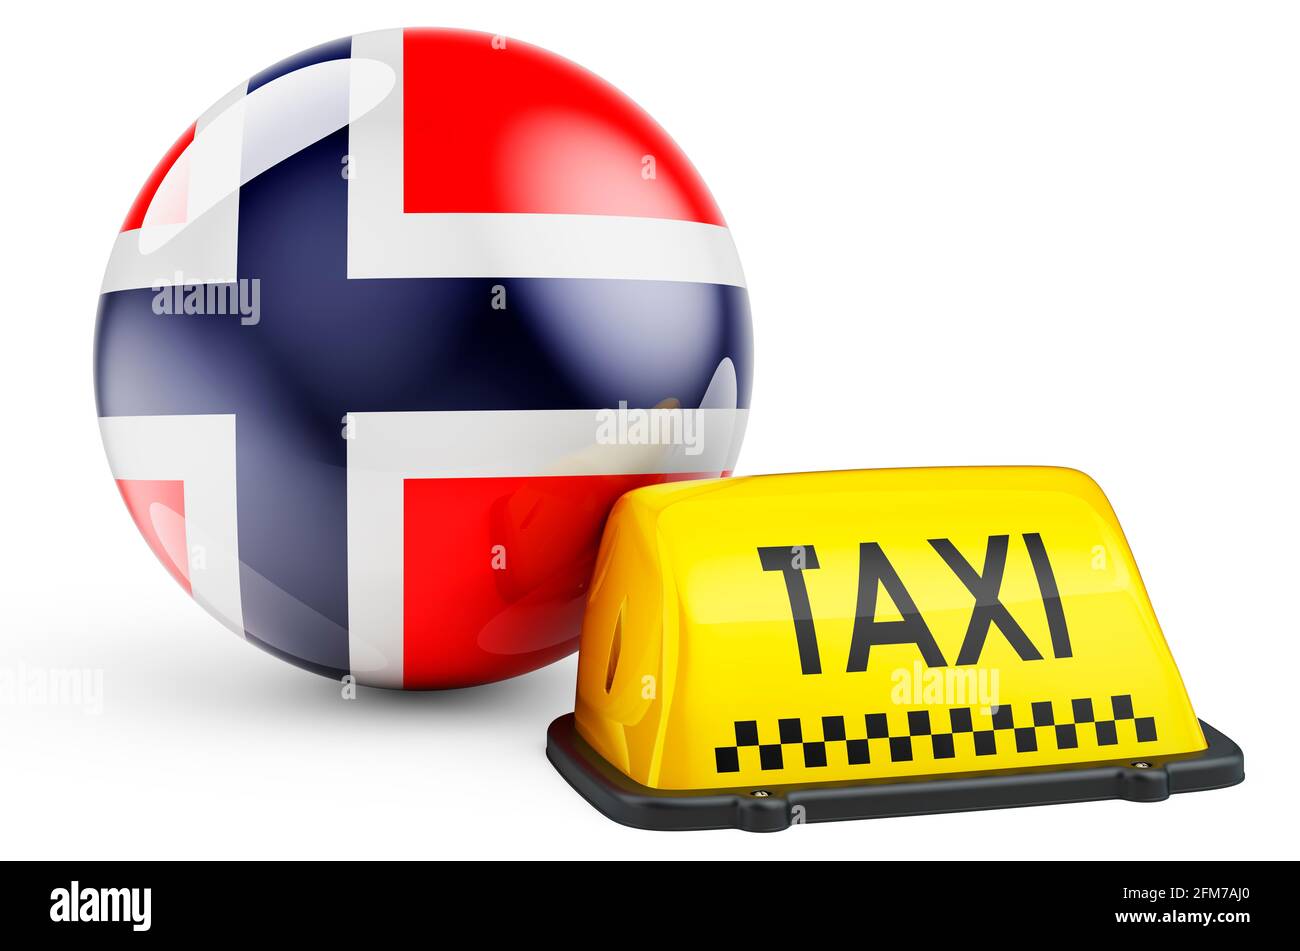 Taxi service in Norway concept. Yellow taxi car signboard with Norwegian flag, 3D rendering isolated on white background Stock Photo